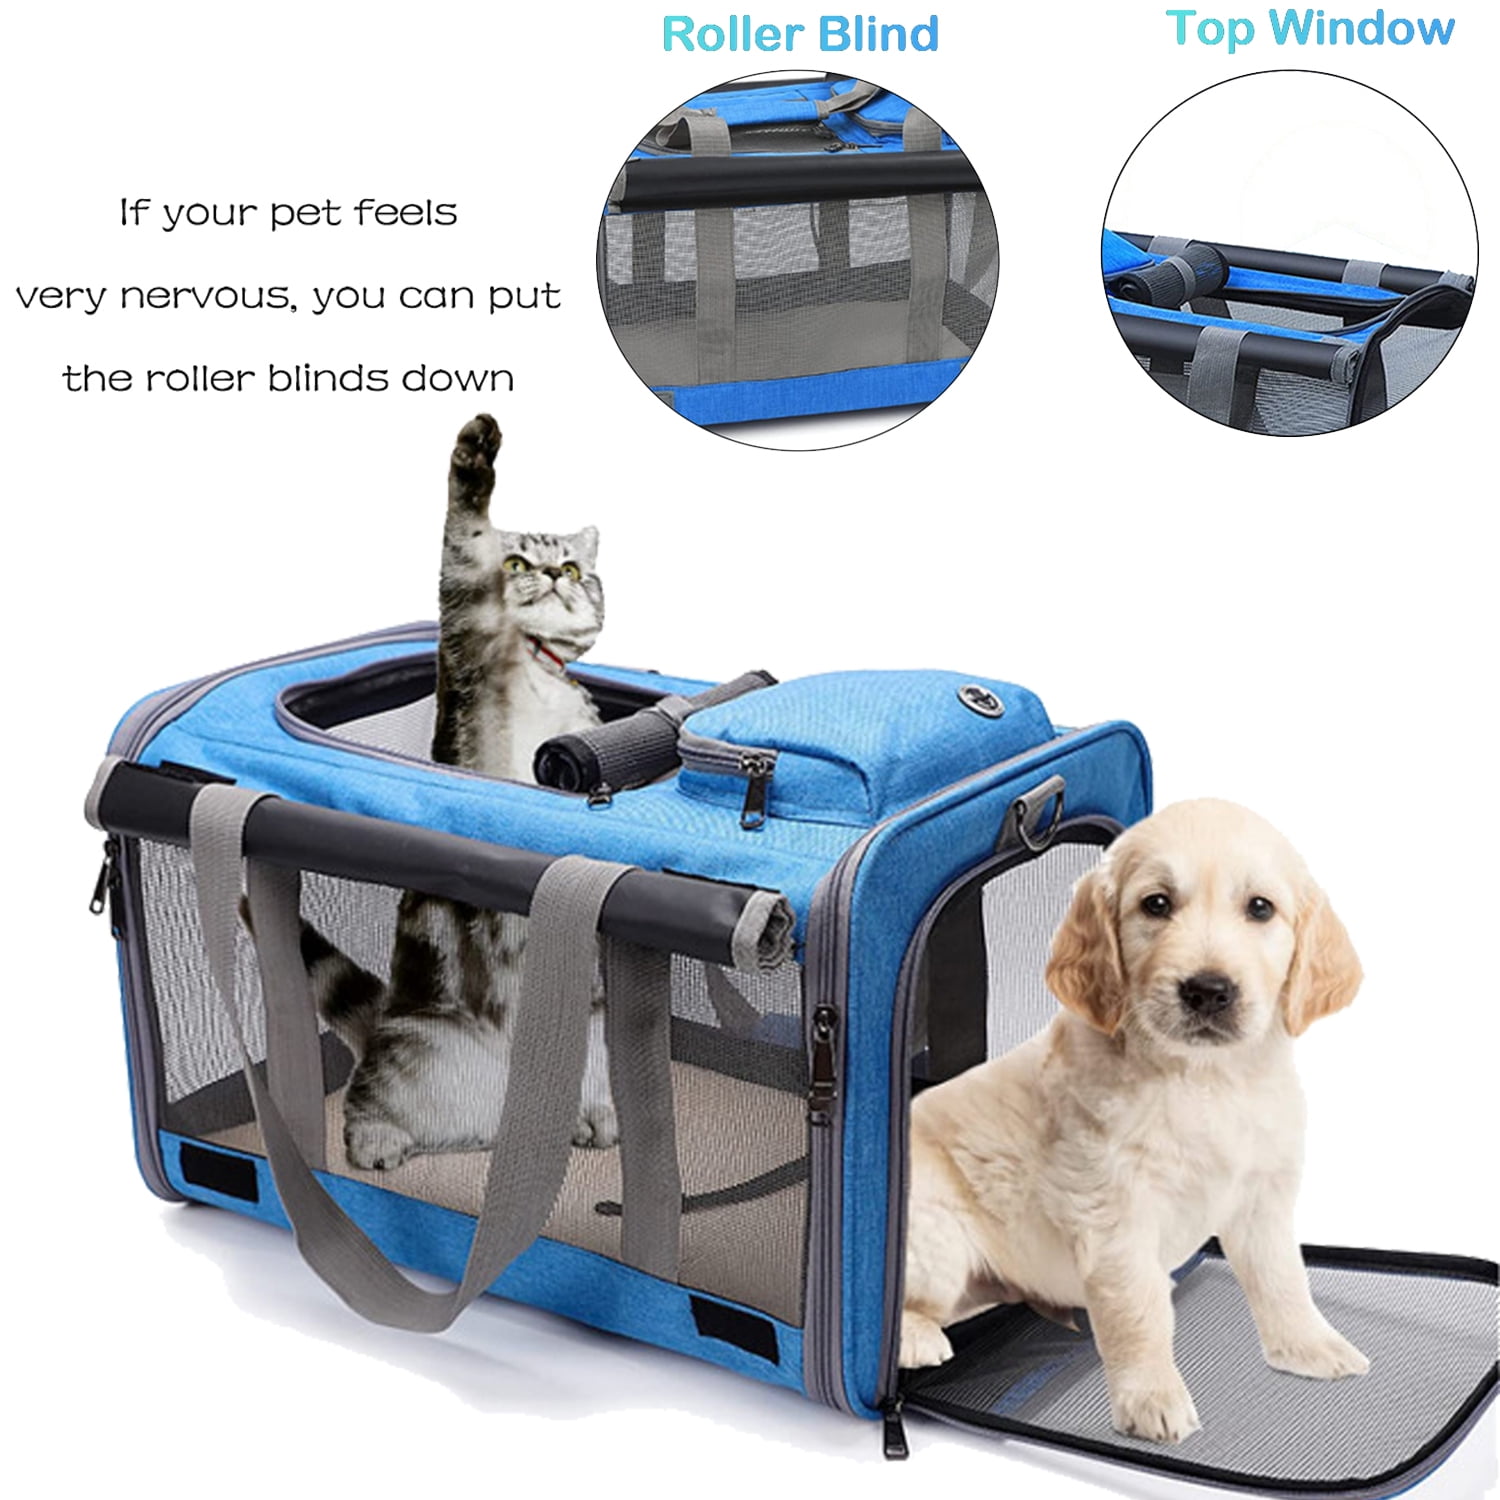 Cat Carrier Pet Large Cat Carrier for Small Medium Dogs Cats Under 25lbs with A Bowl, Mat, TSA Airline Approved